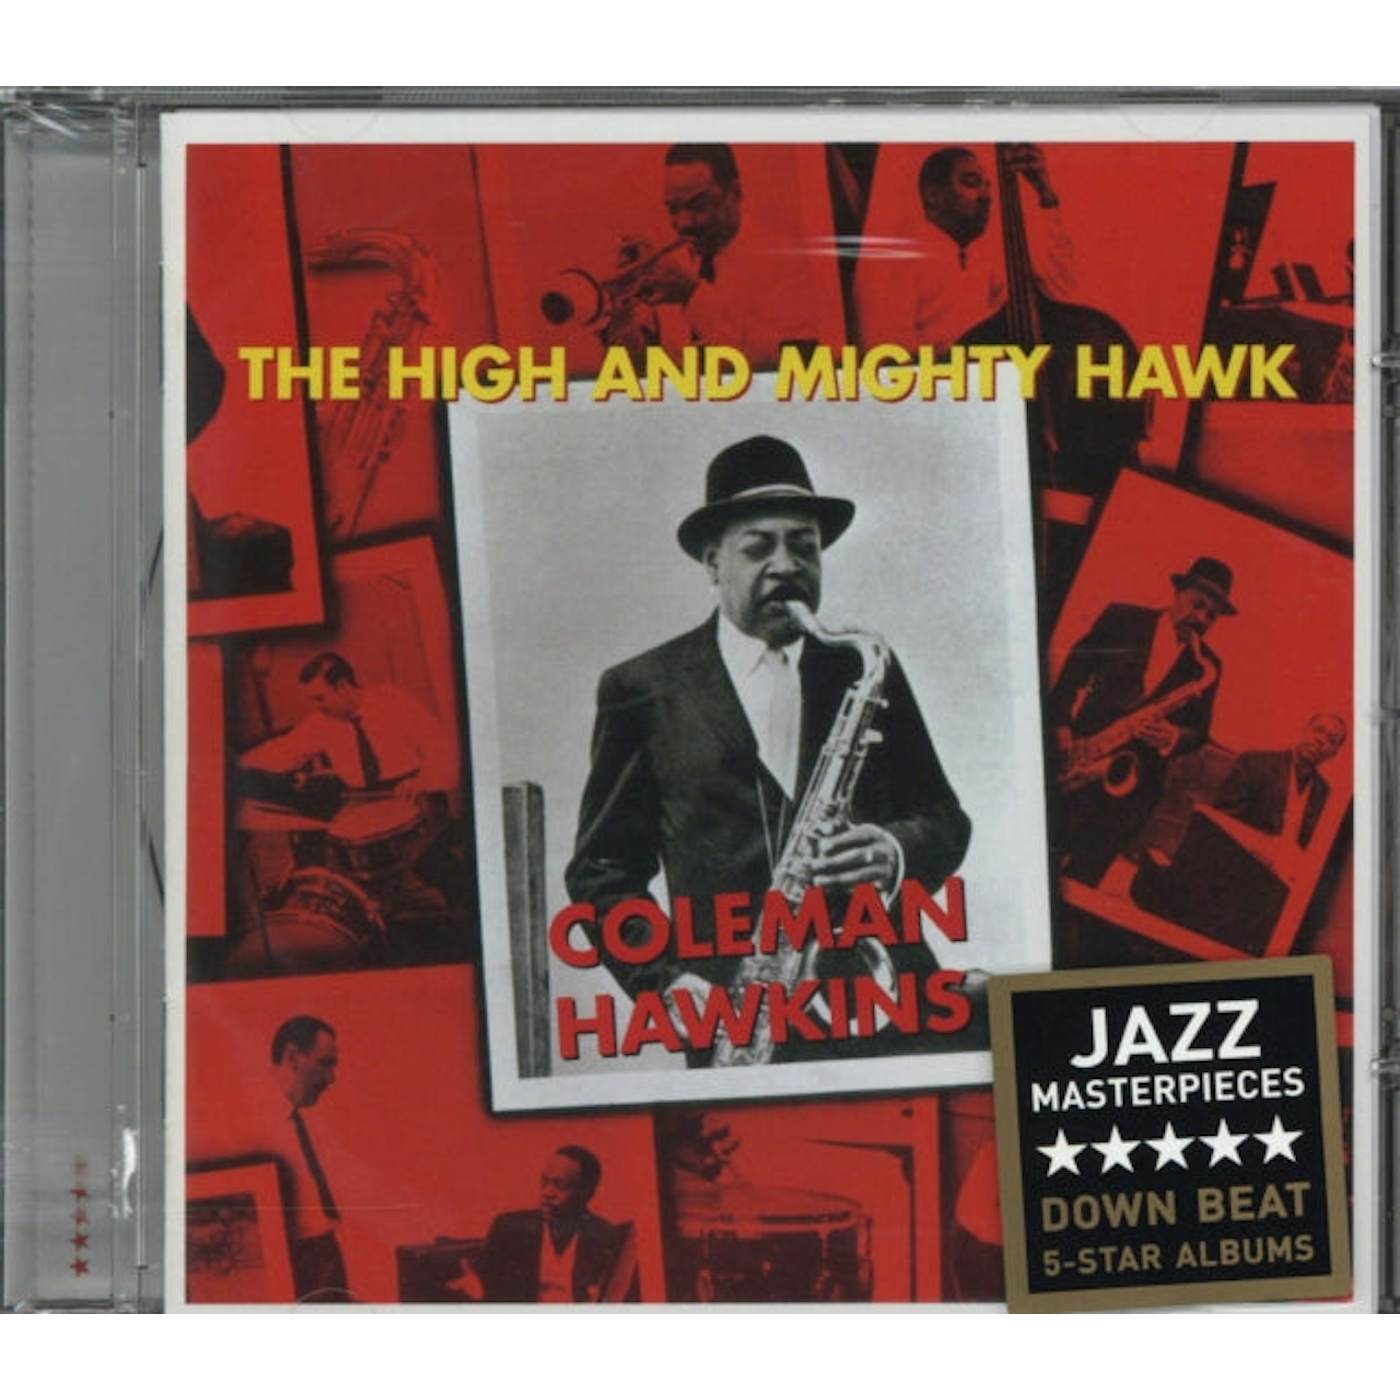 Coleman Hawkins CD - The High And Mighty Hawk